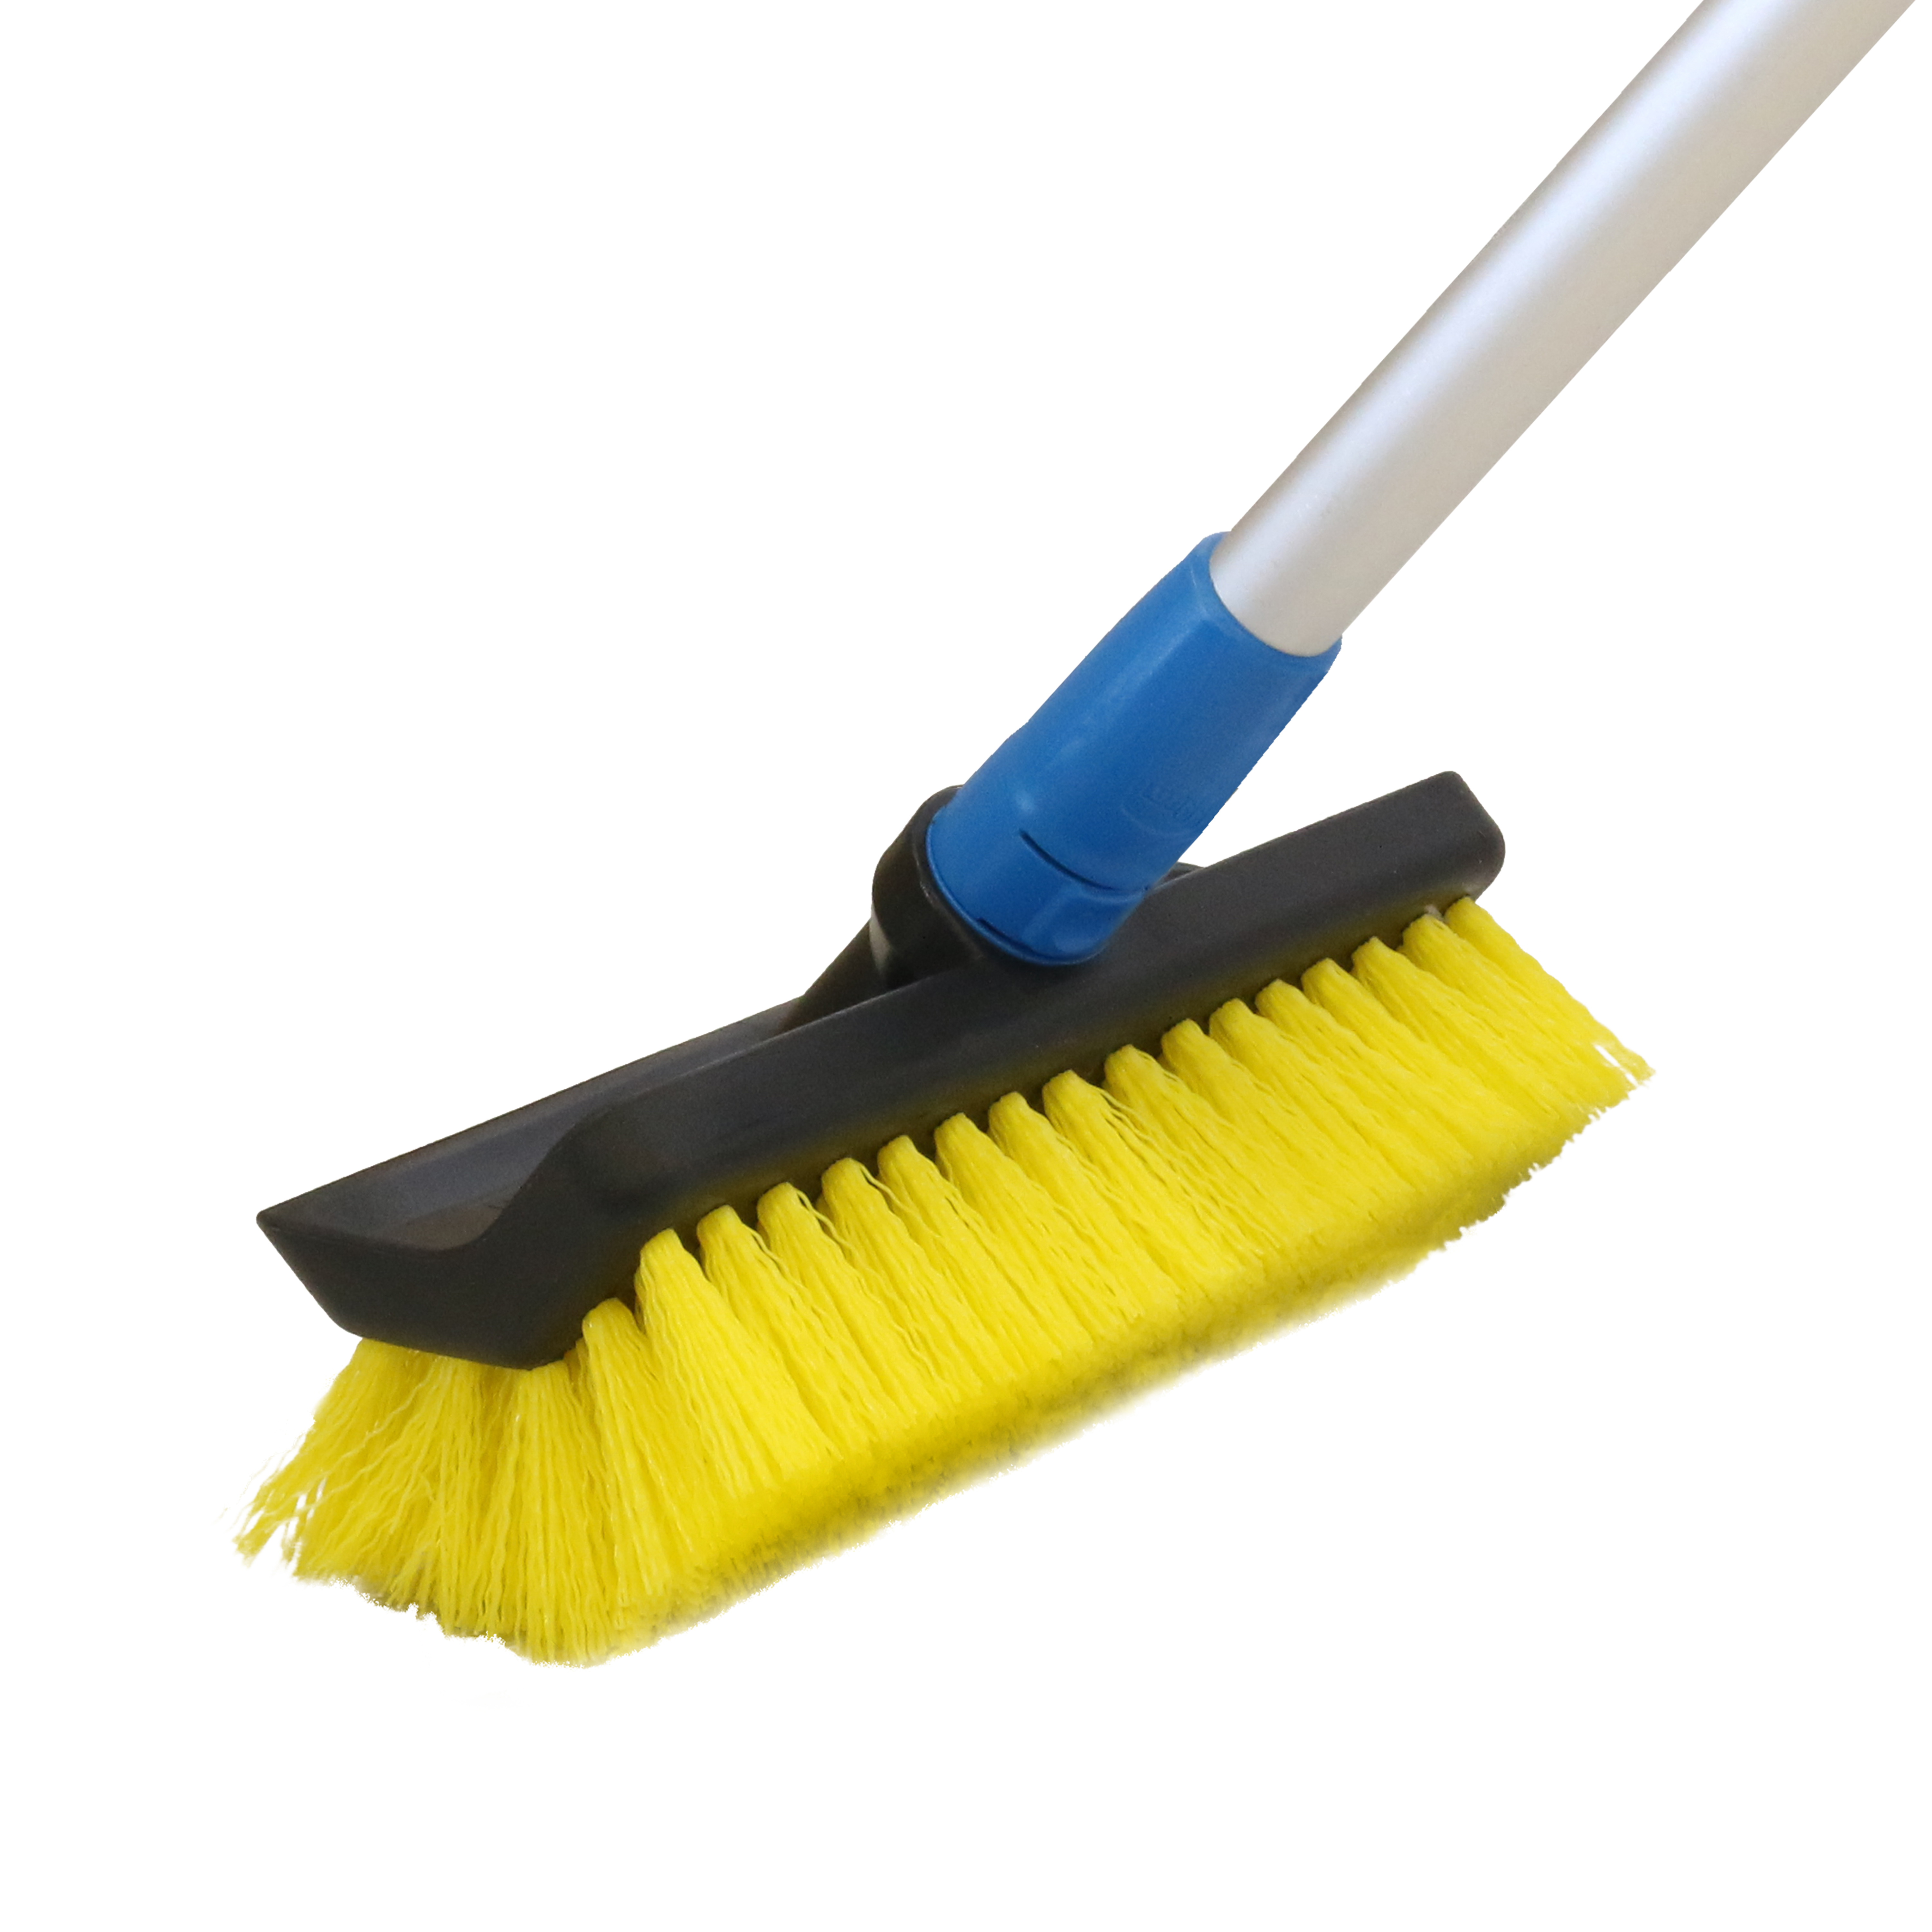 Unger Professional 976820 Scrub Brush, 1-3/4 in L Trim, Synthetic - 2